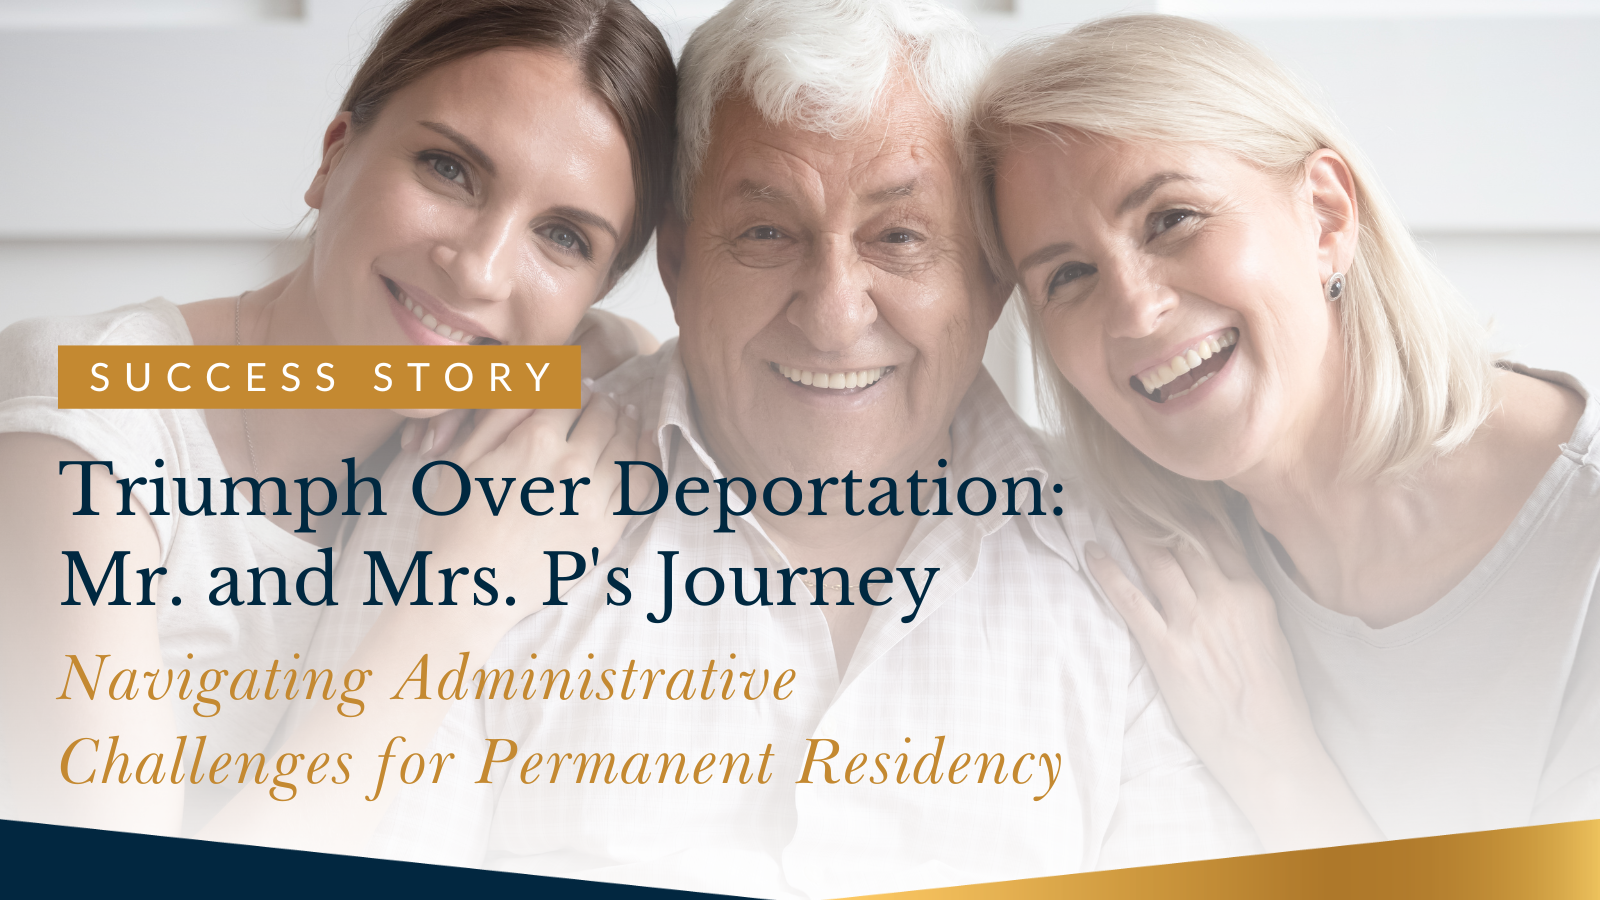 Triumph Over Deportation: Mr. and Mrs. P's Journey